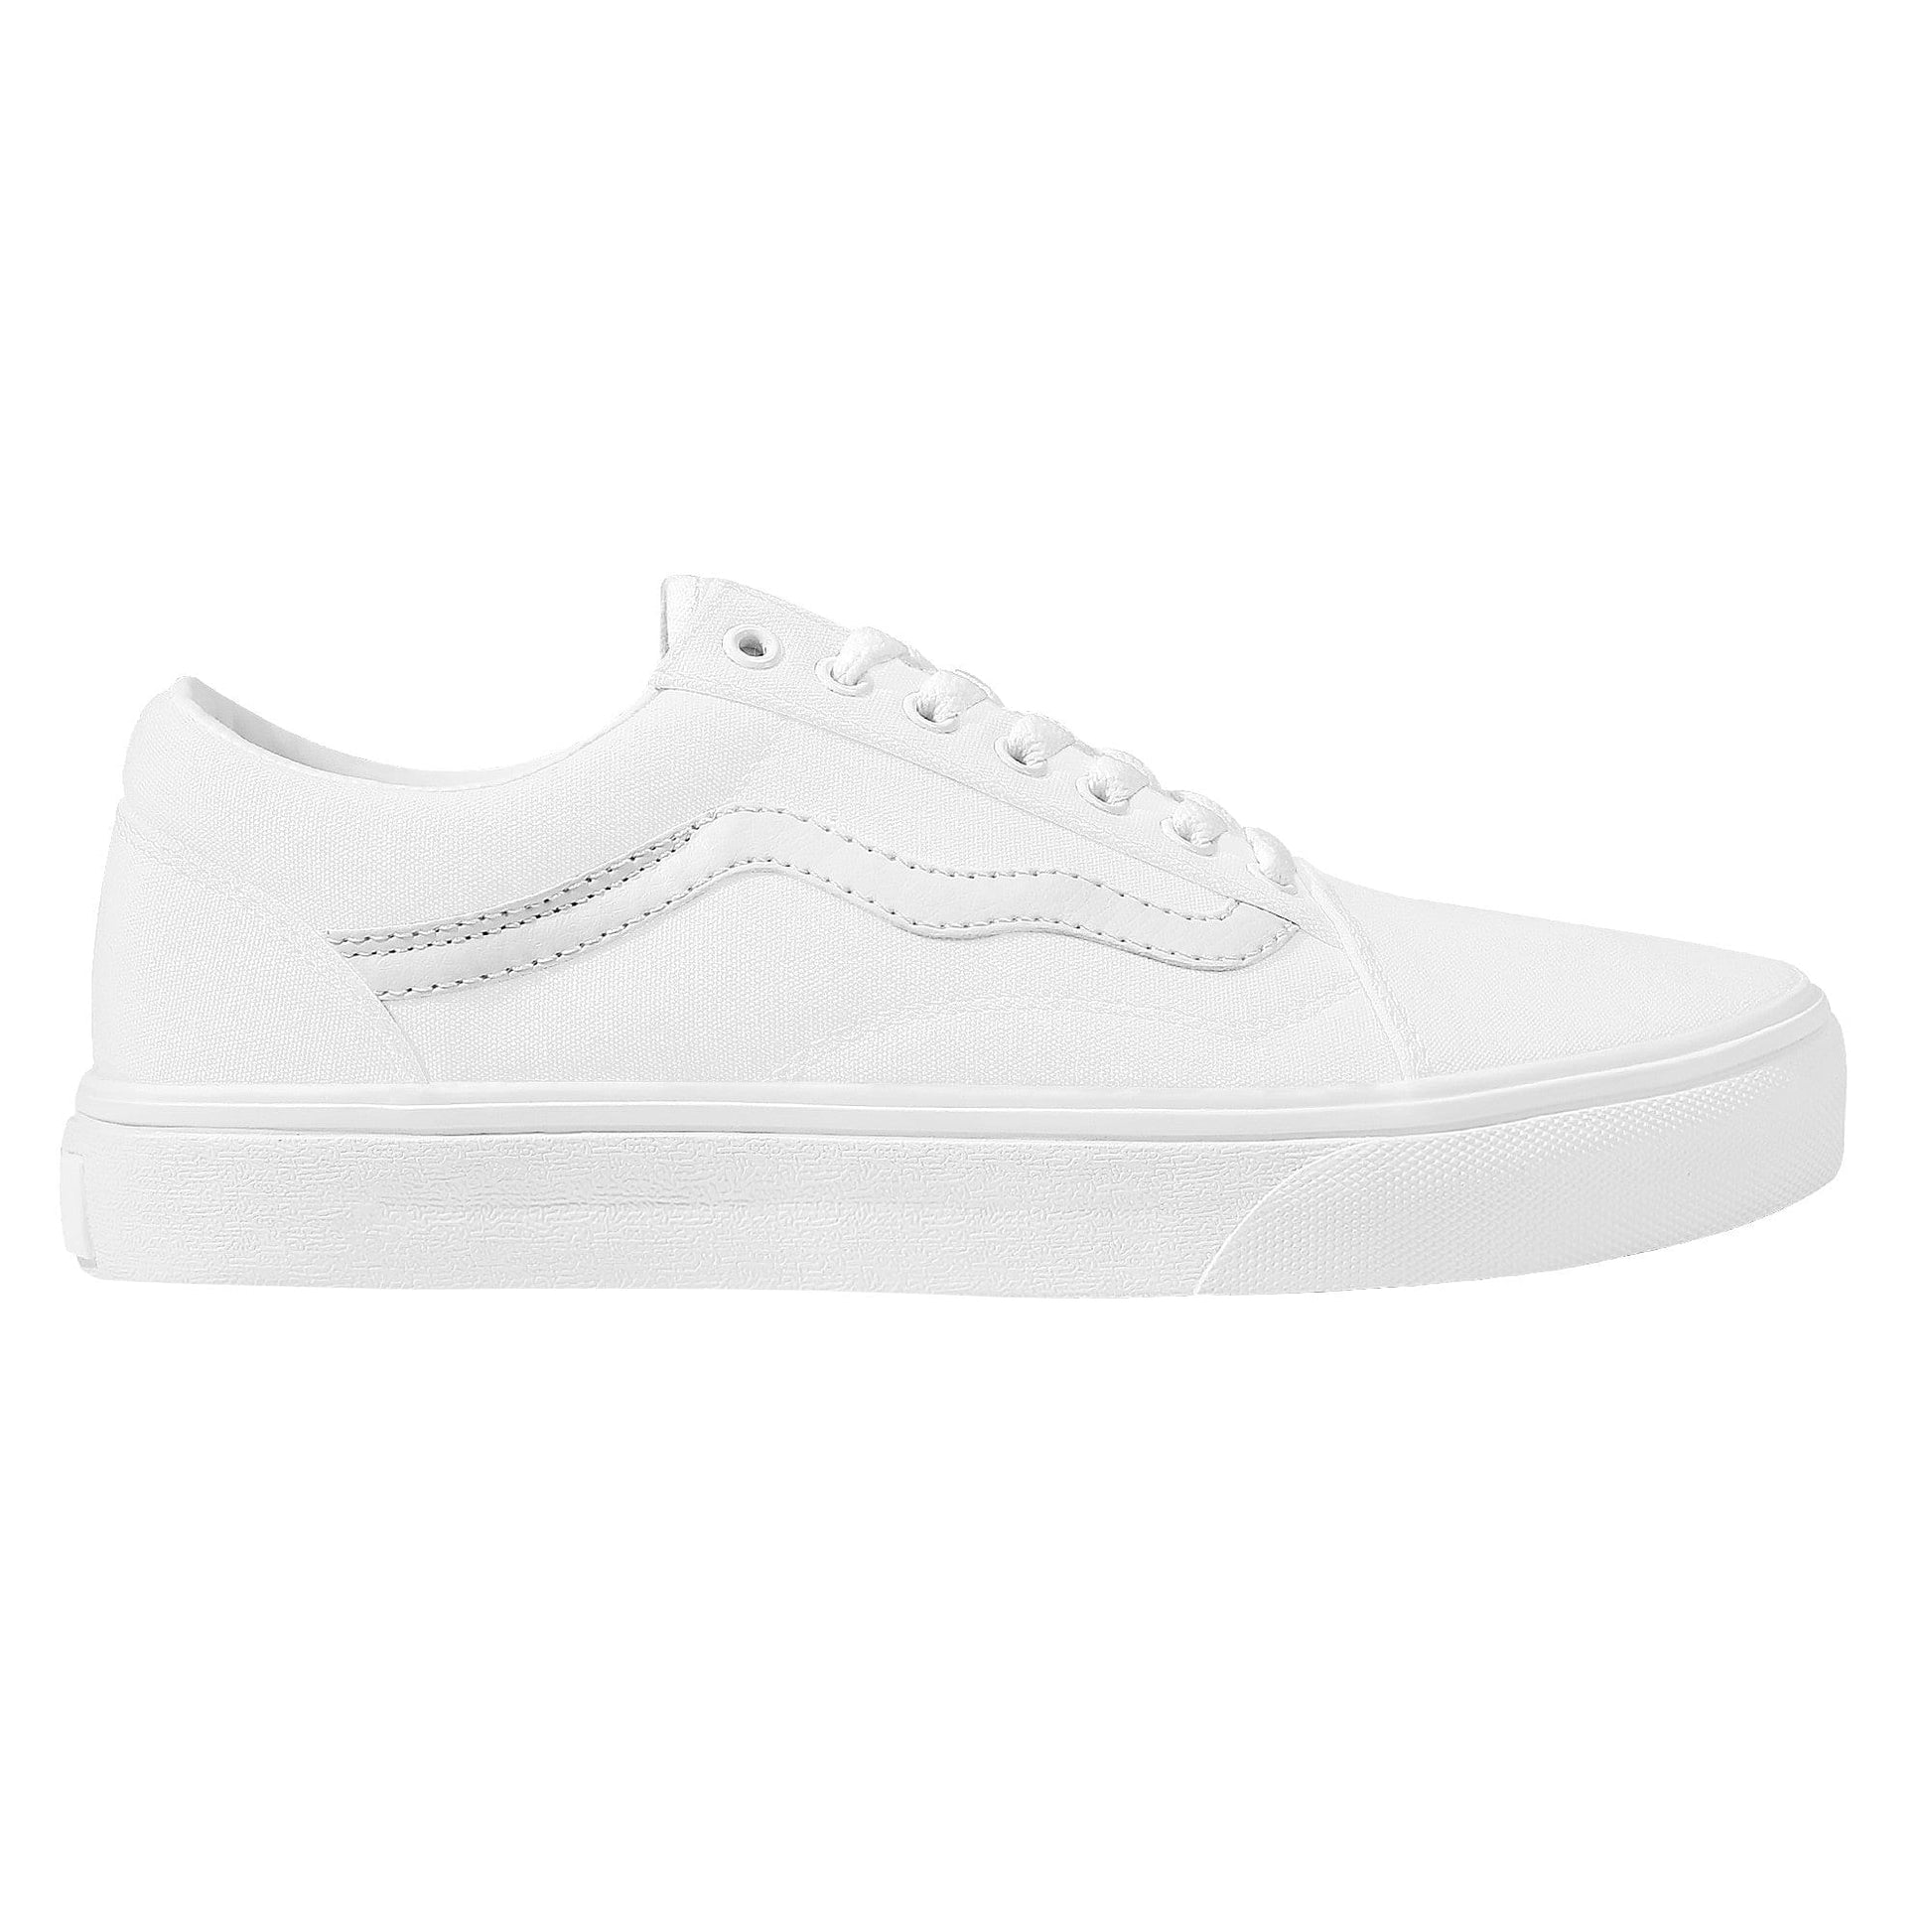 Custom Low Top Flat Sneakers -SF F21 Colloid Colors 